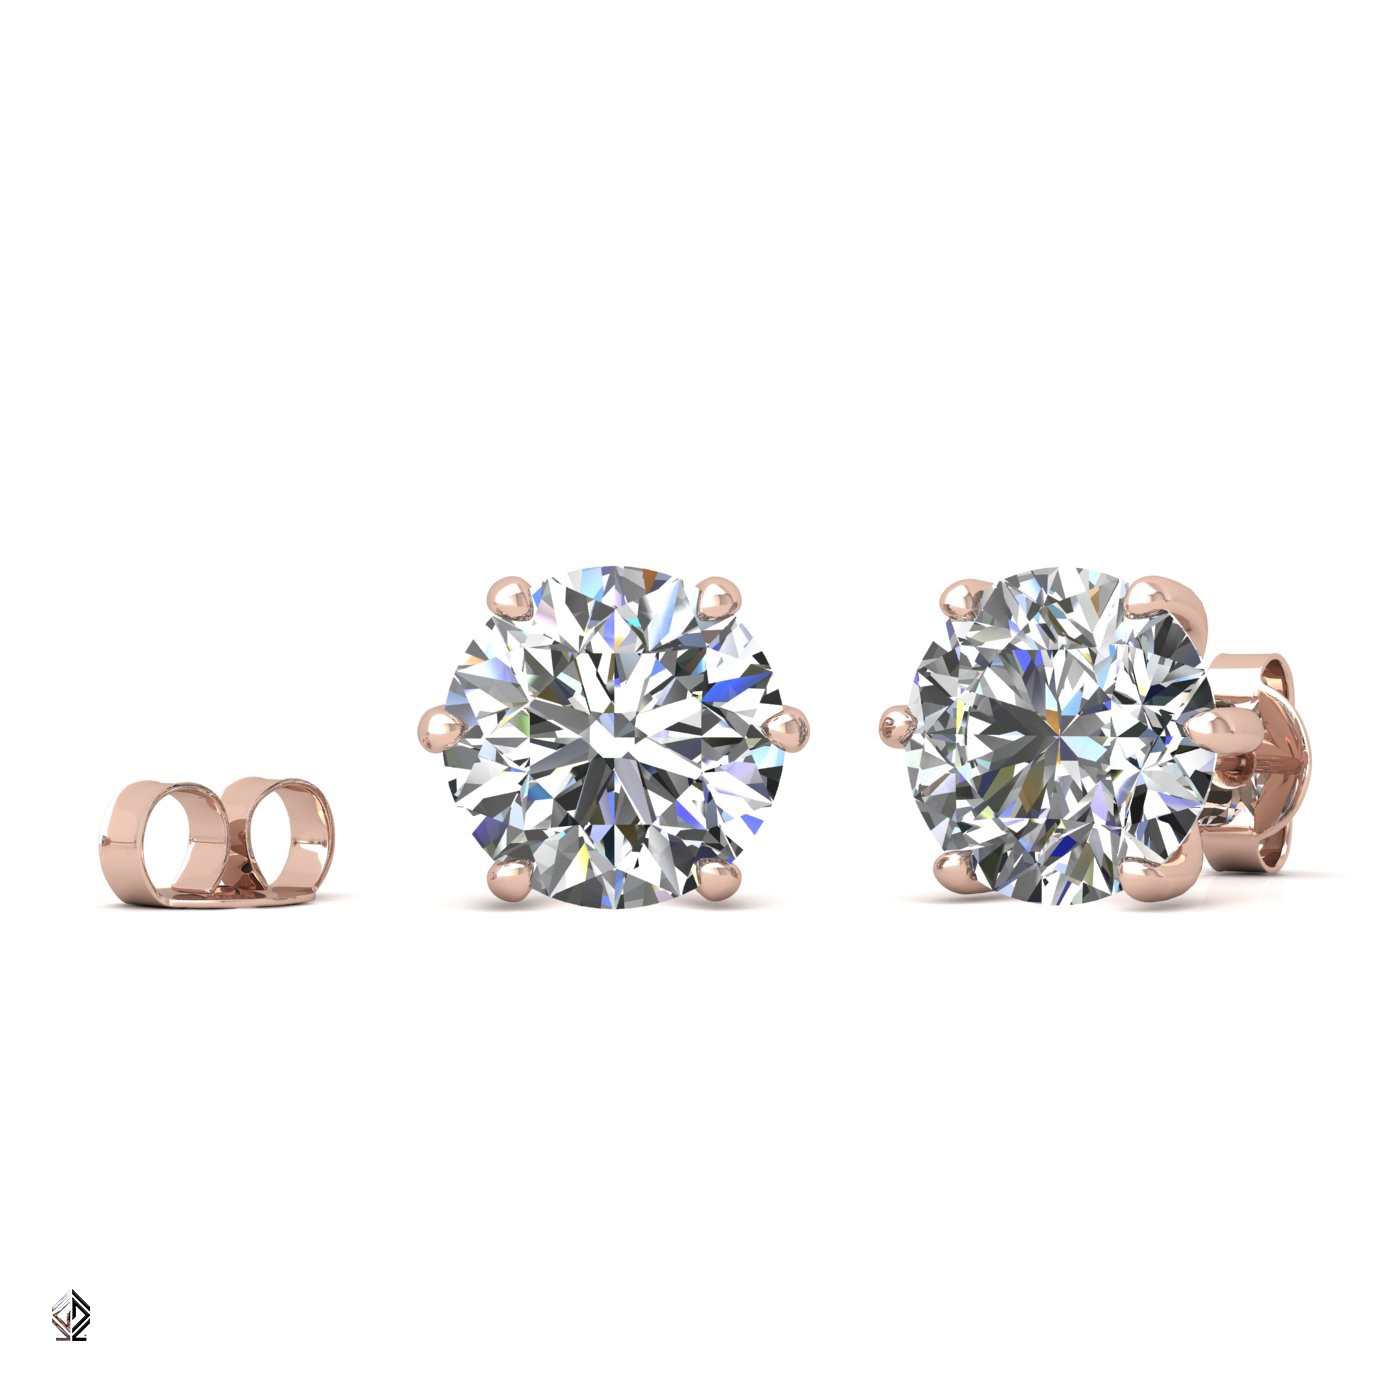 18k rose gold 1.5 ct each (3,0 tcw) 6 prongs round shape diamond earrings Photos & images